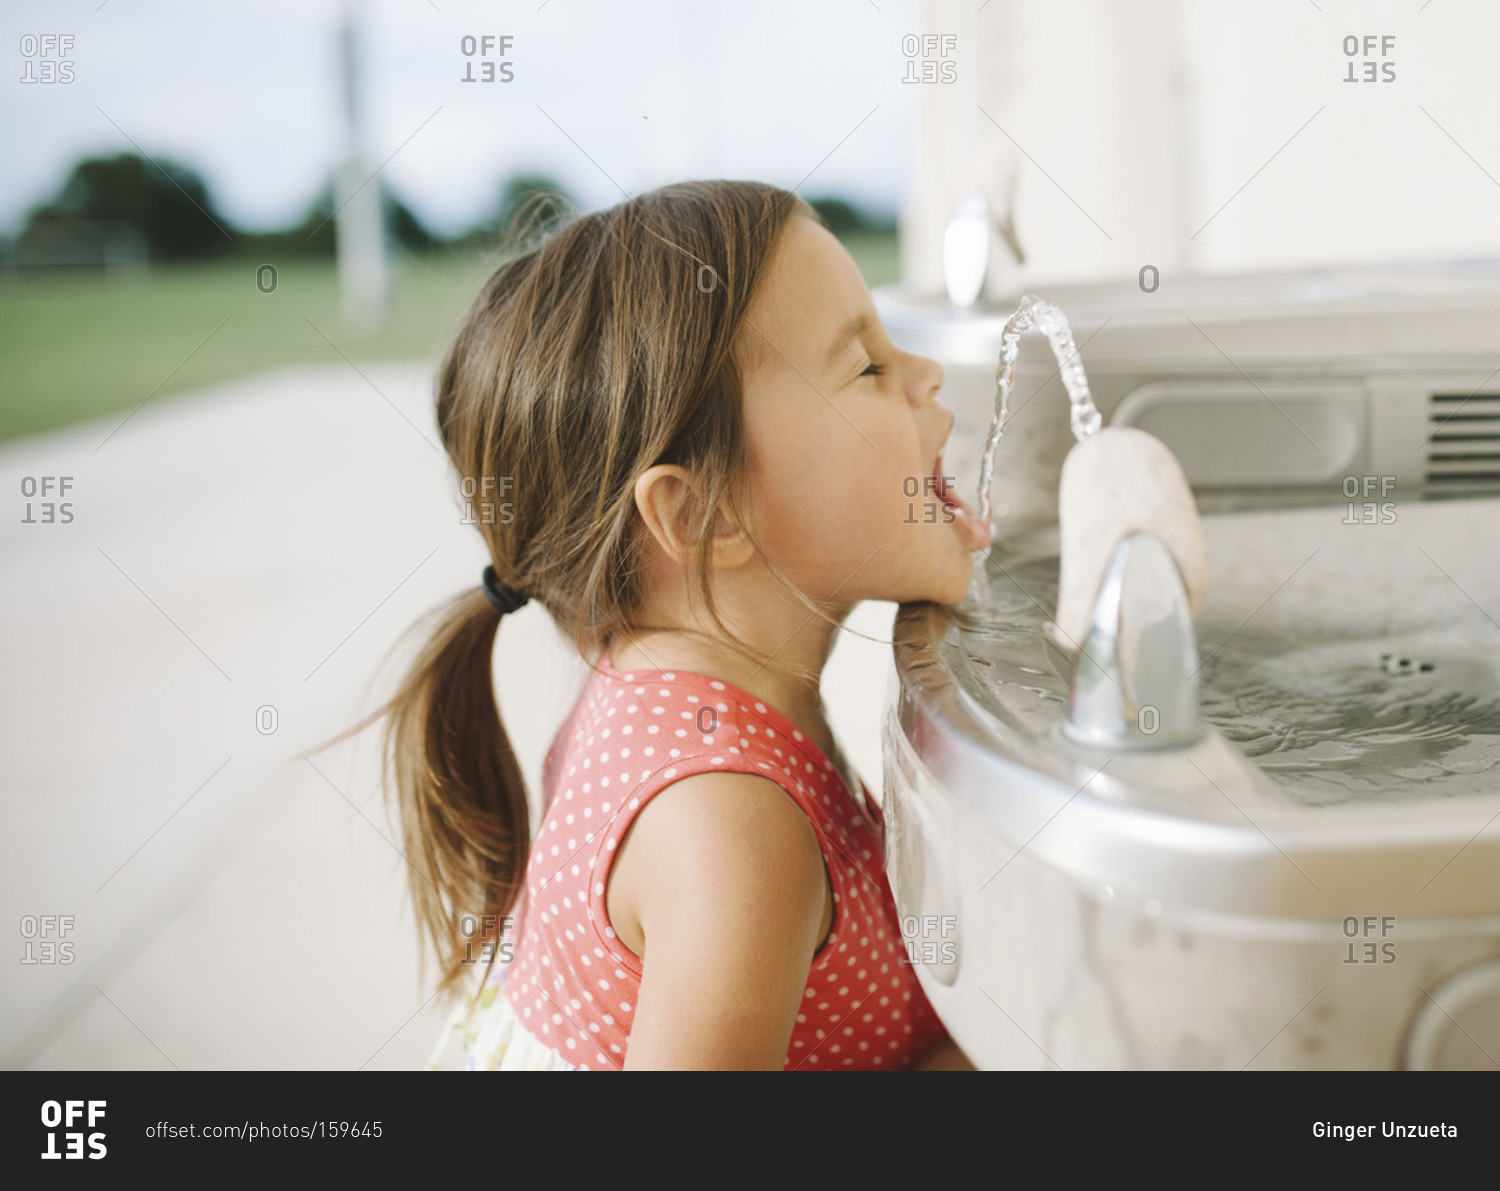 Portrait of a young girl at a drinking fountain